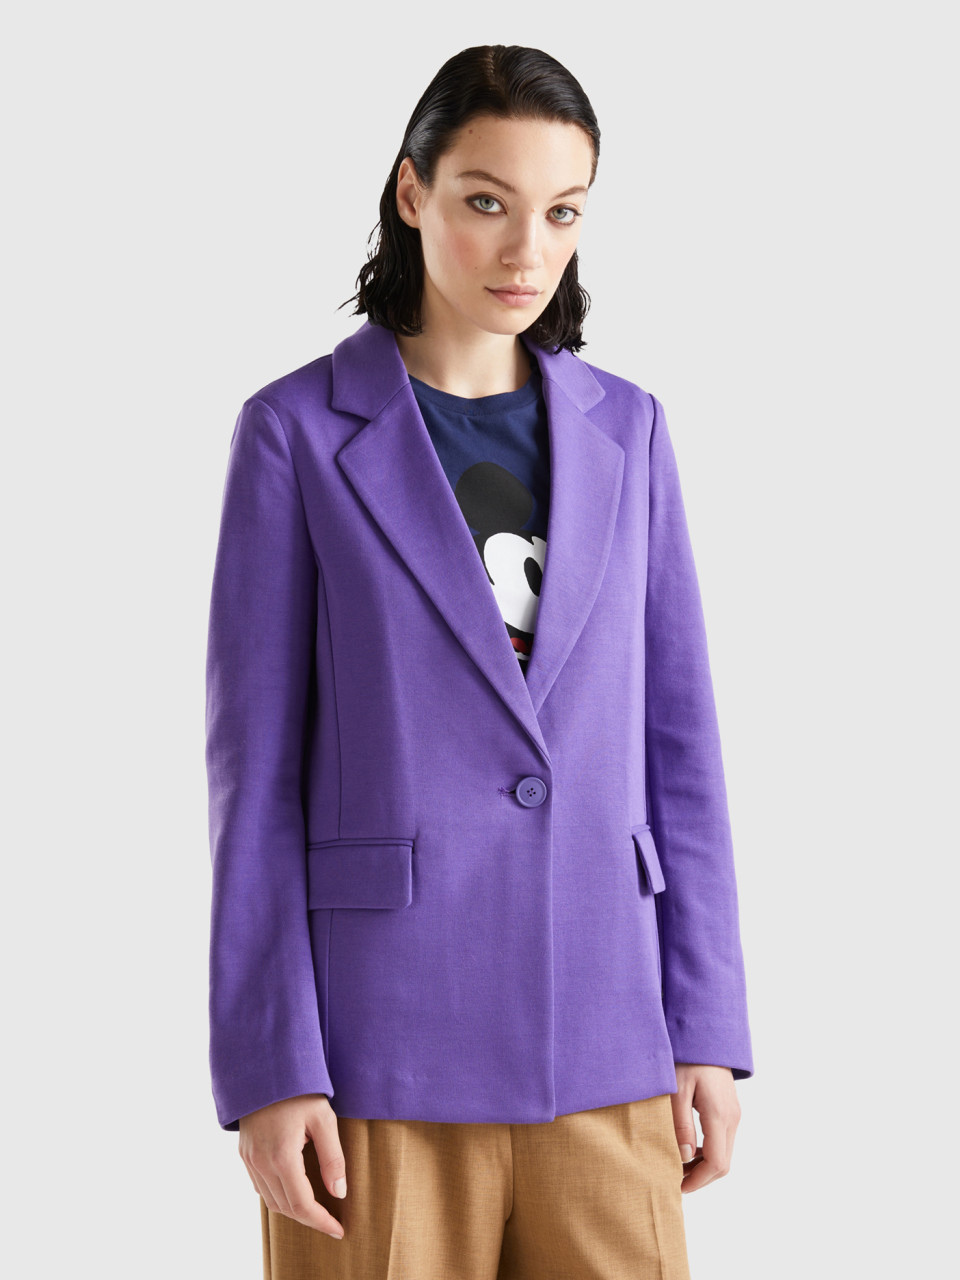 Benetton, Fitted Blazer With Pockets, Violet, Women